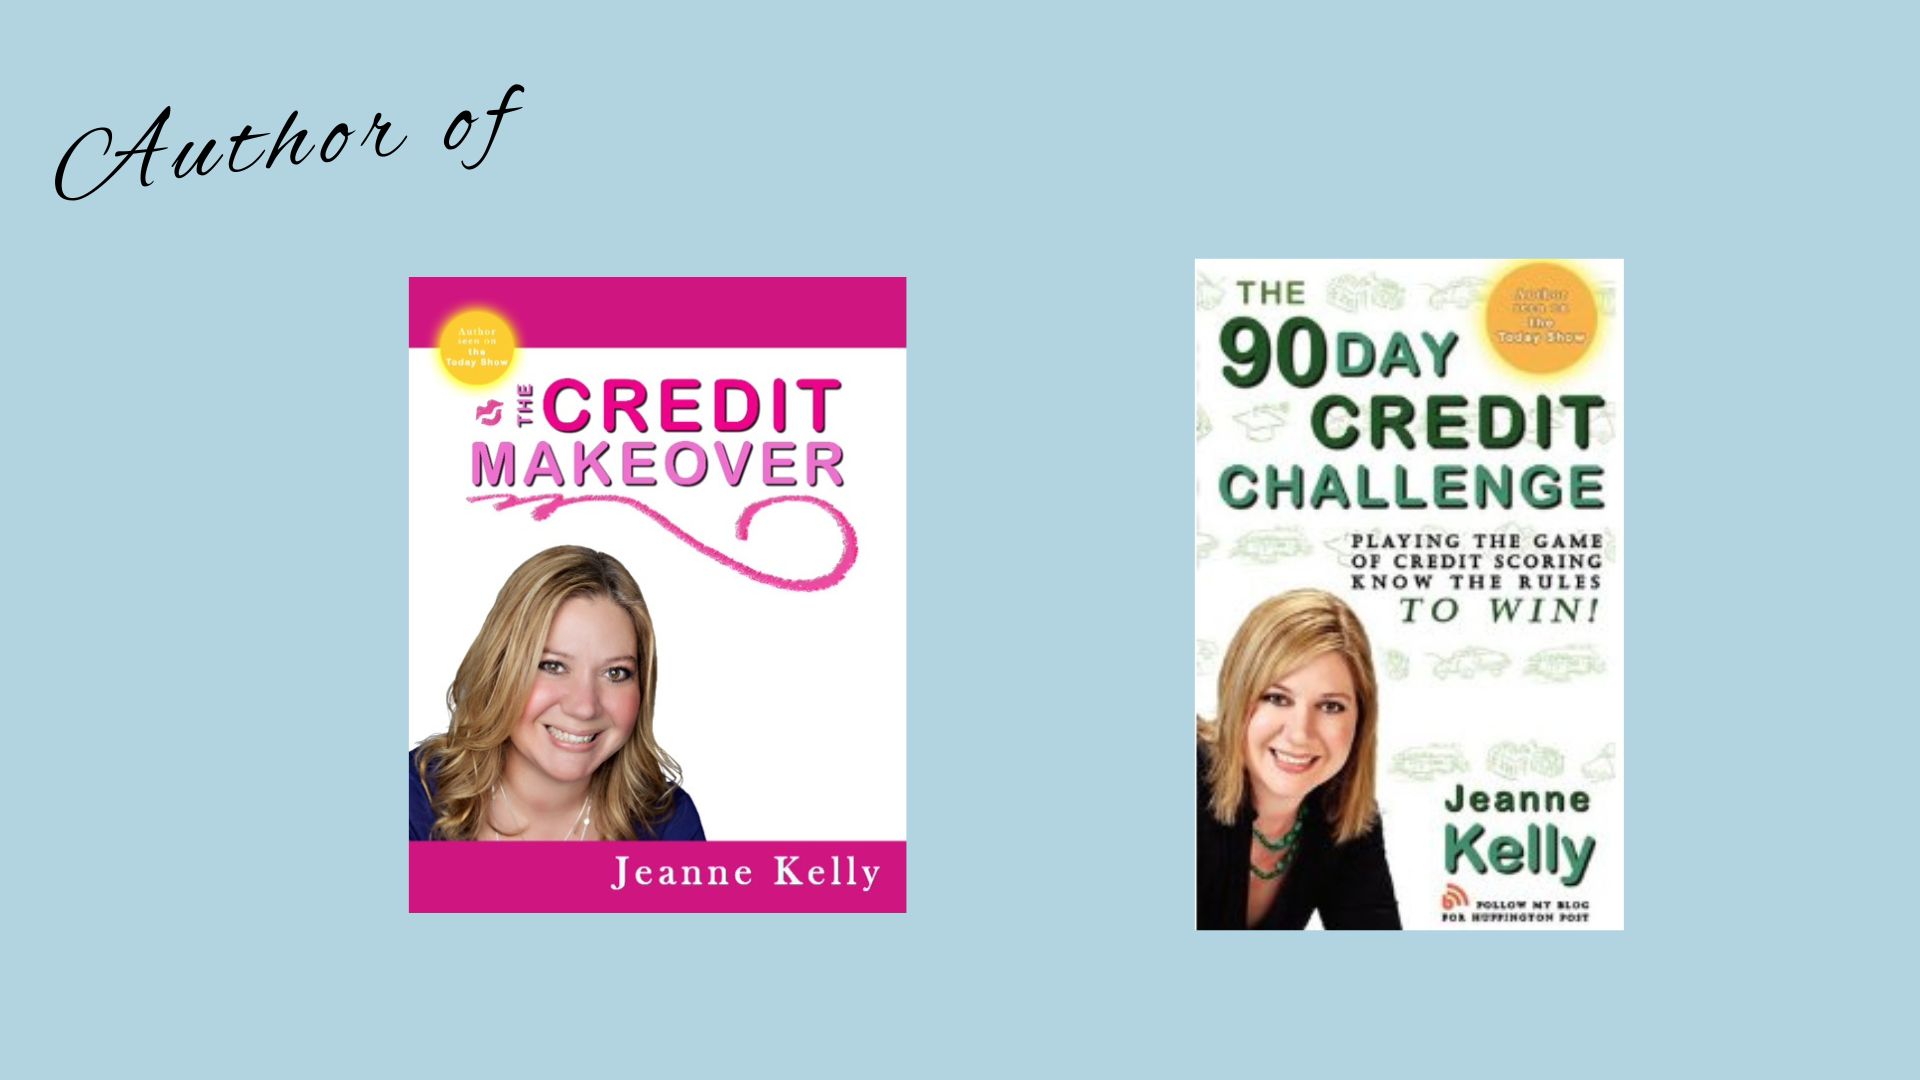 Jeanne-Kelly-Credit-Coach-Author-90-Day-Credit-Challenge-Credit-Makeover